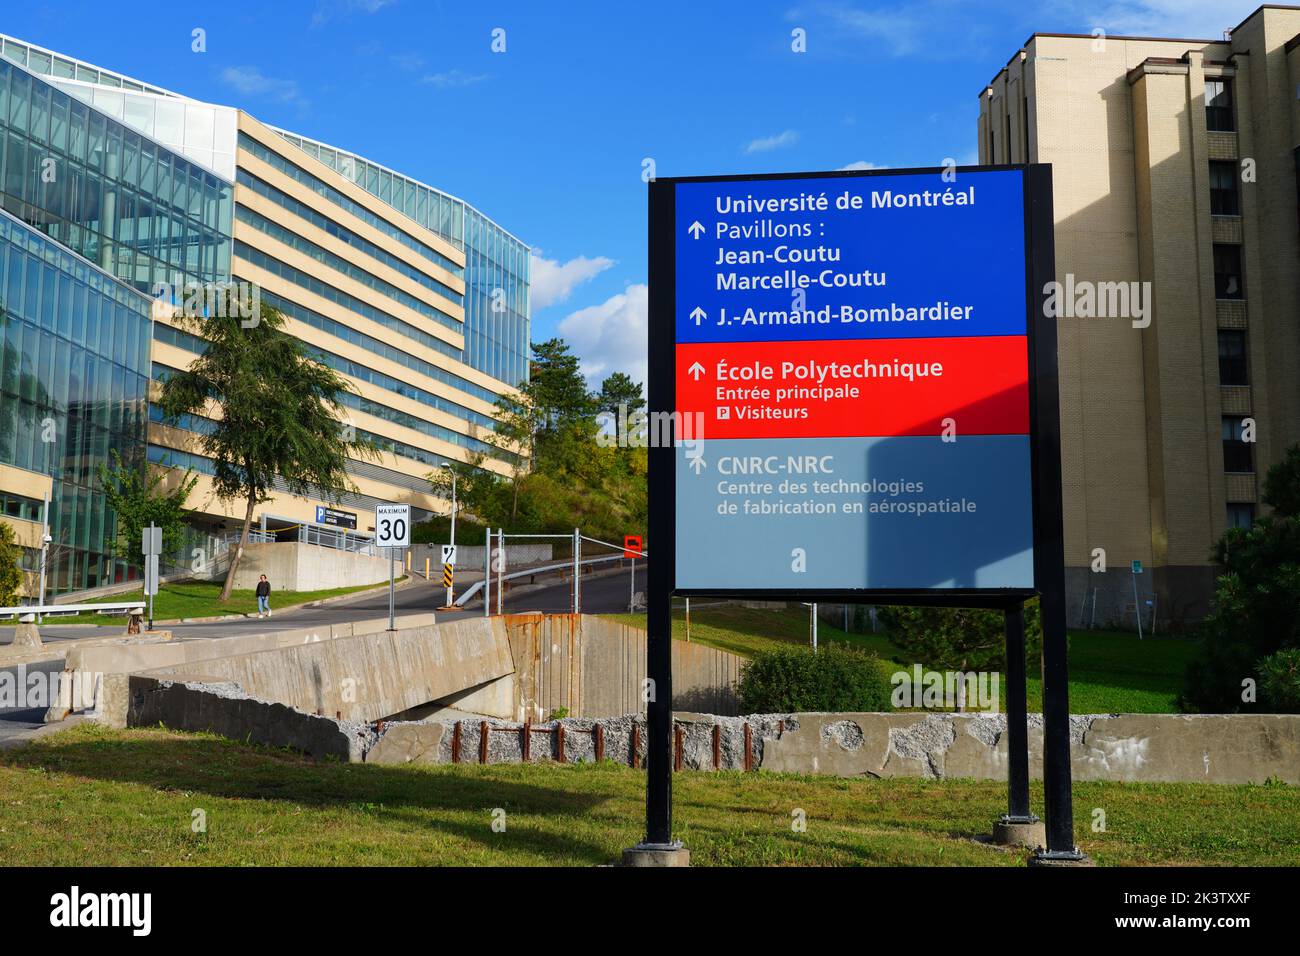 MONTREAL, CANADA -16 SEP 2022- View of the campus of the Universite de Montreal, a French language university located in the Cote-des-Neiges neighborh Stock Photo